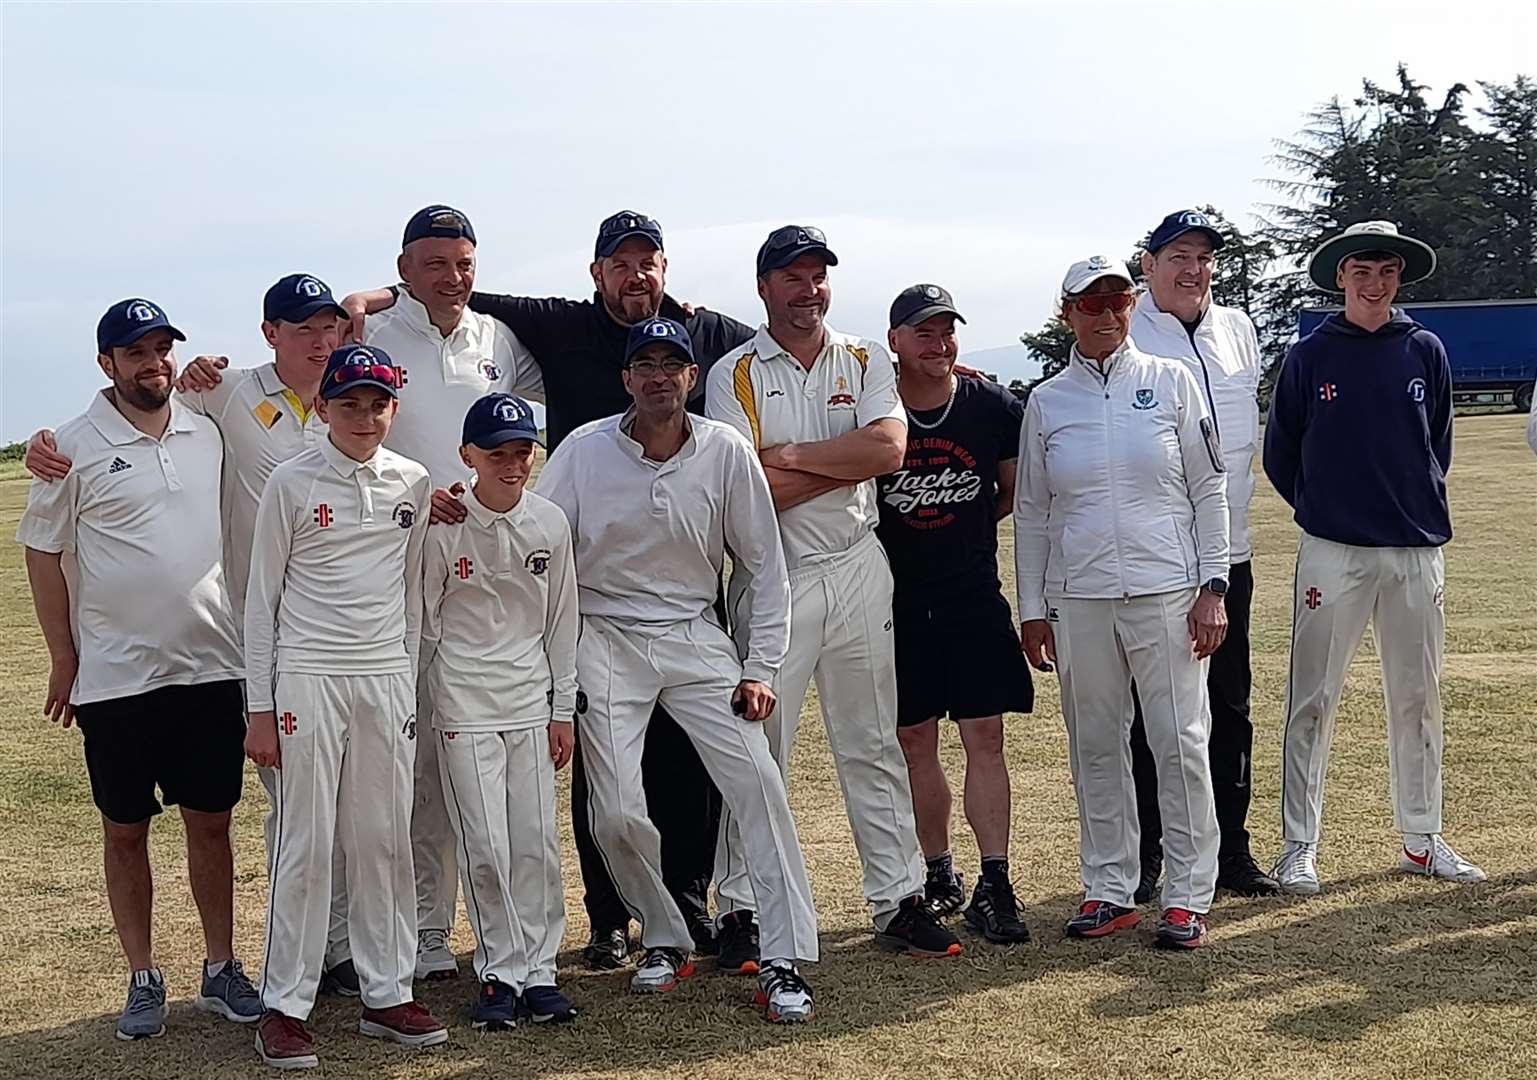 Dornoch Cricket Club played at The Meadows for the first time in 18 years.